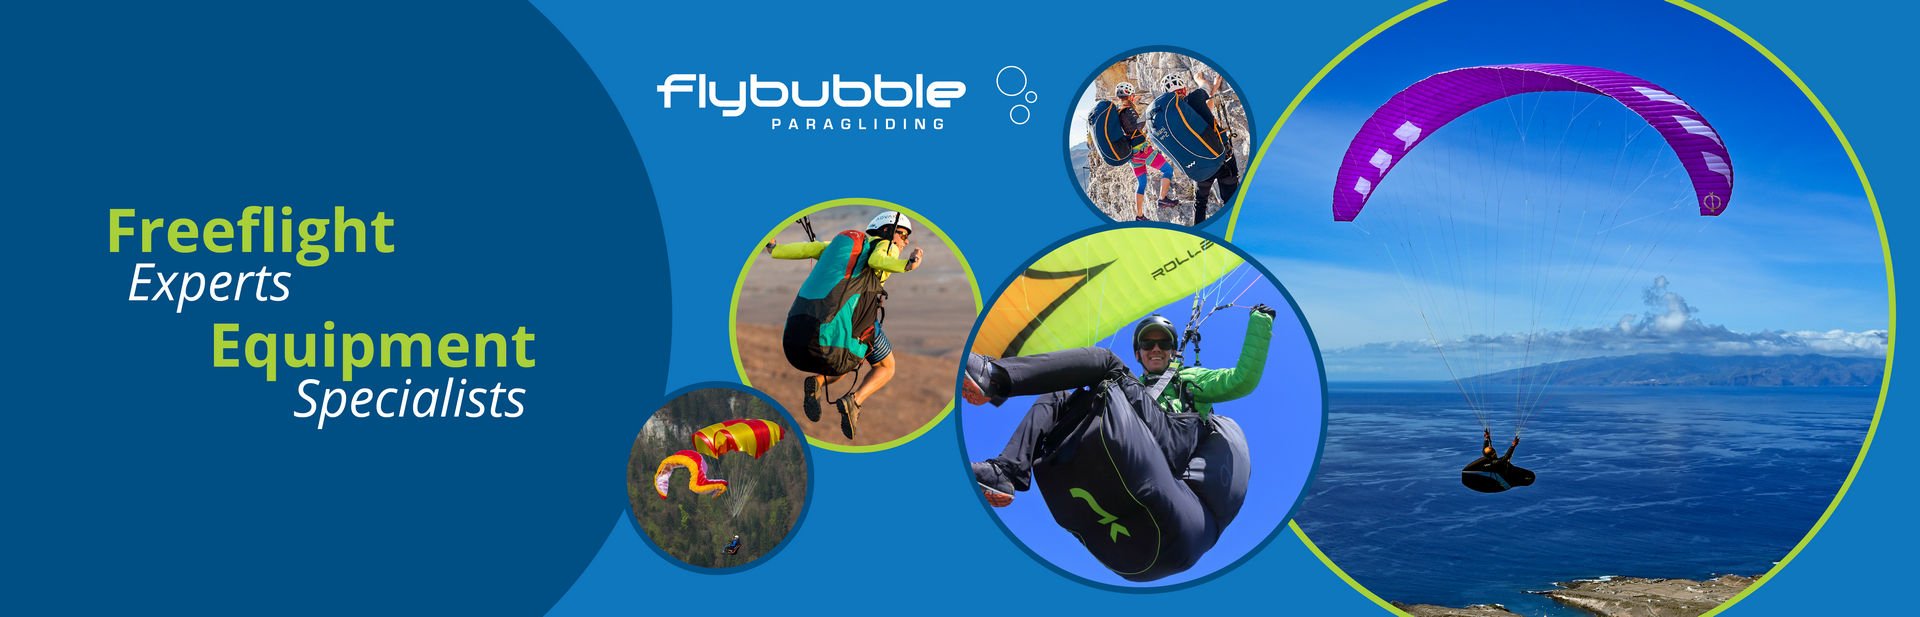 Flybubble - Your paragliding experts. Freeflight equipment specialists.